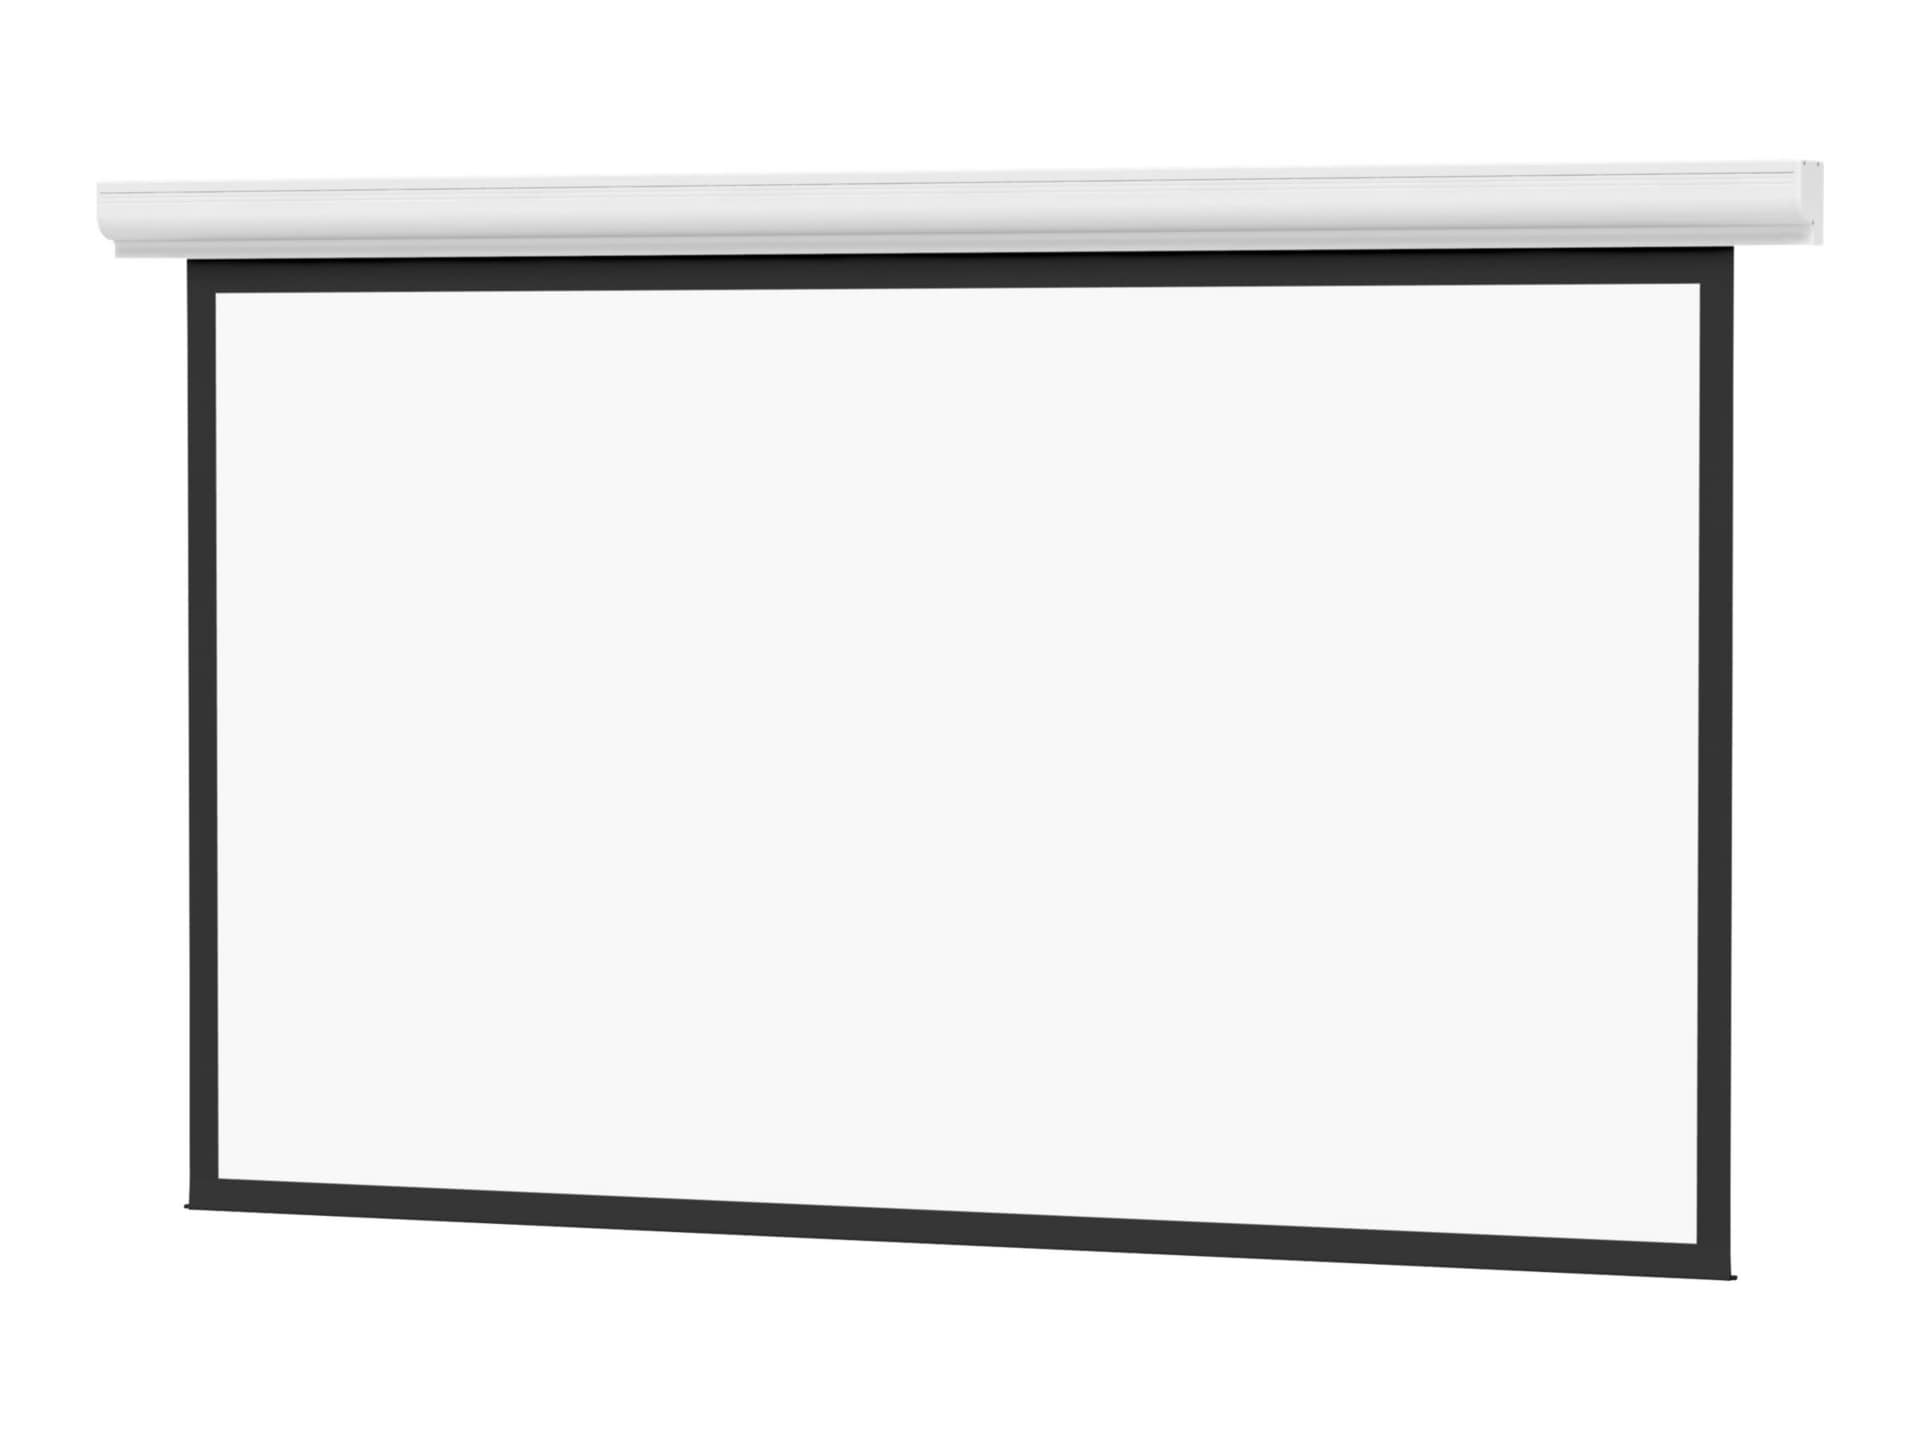 Da-Lite Contour Electrol Series Projection Screen - Wall or Ceiling Mounted Electric Screen - 137in Screen